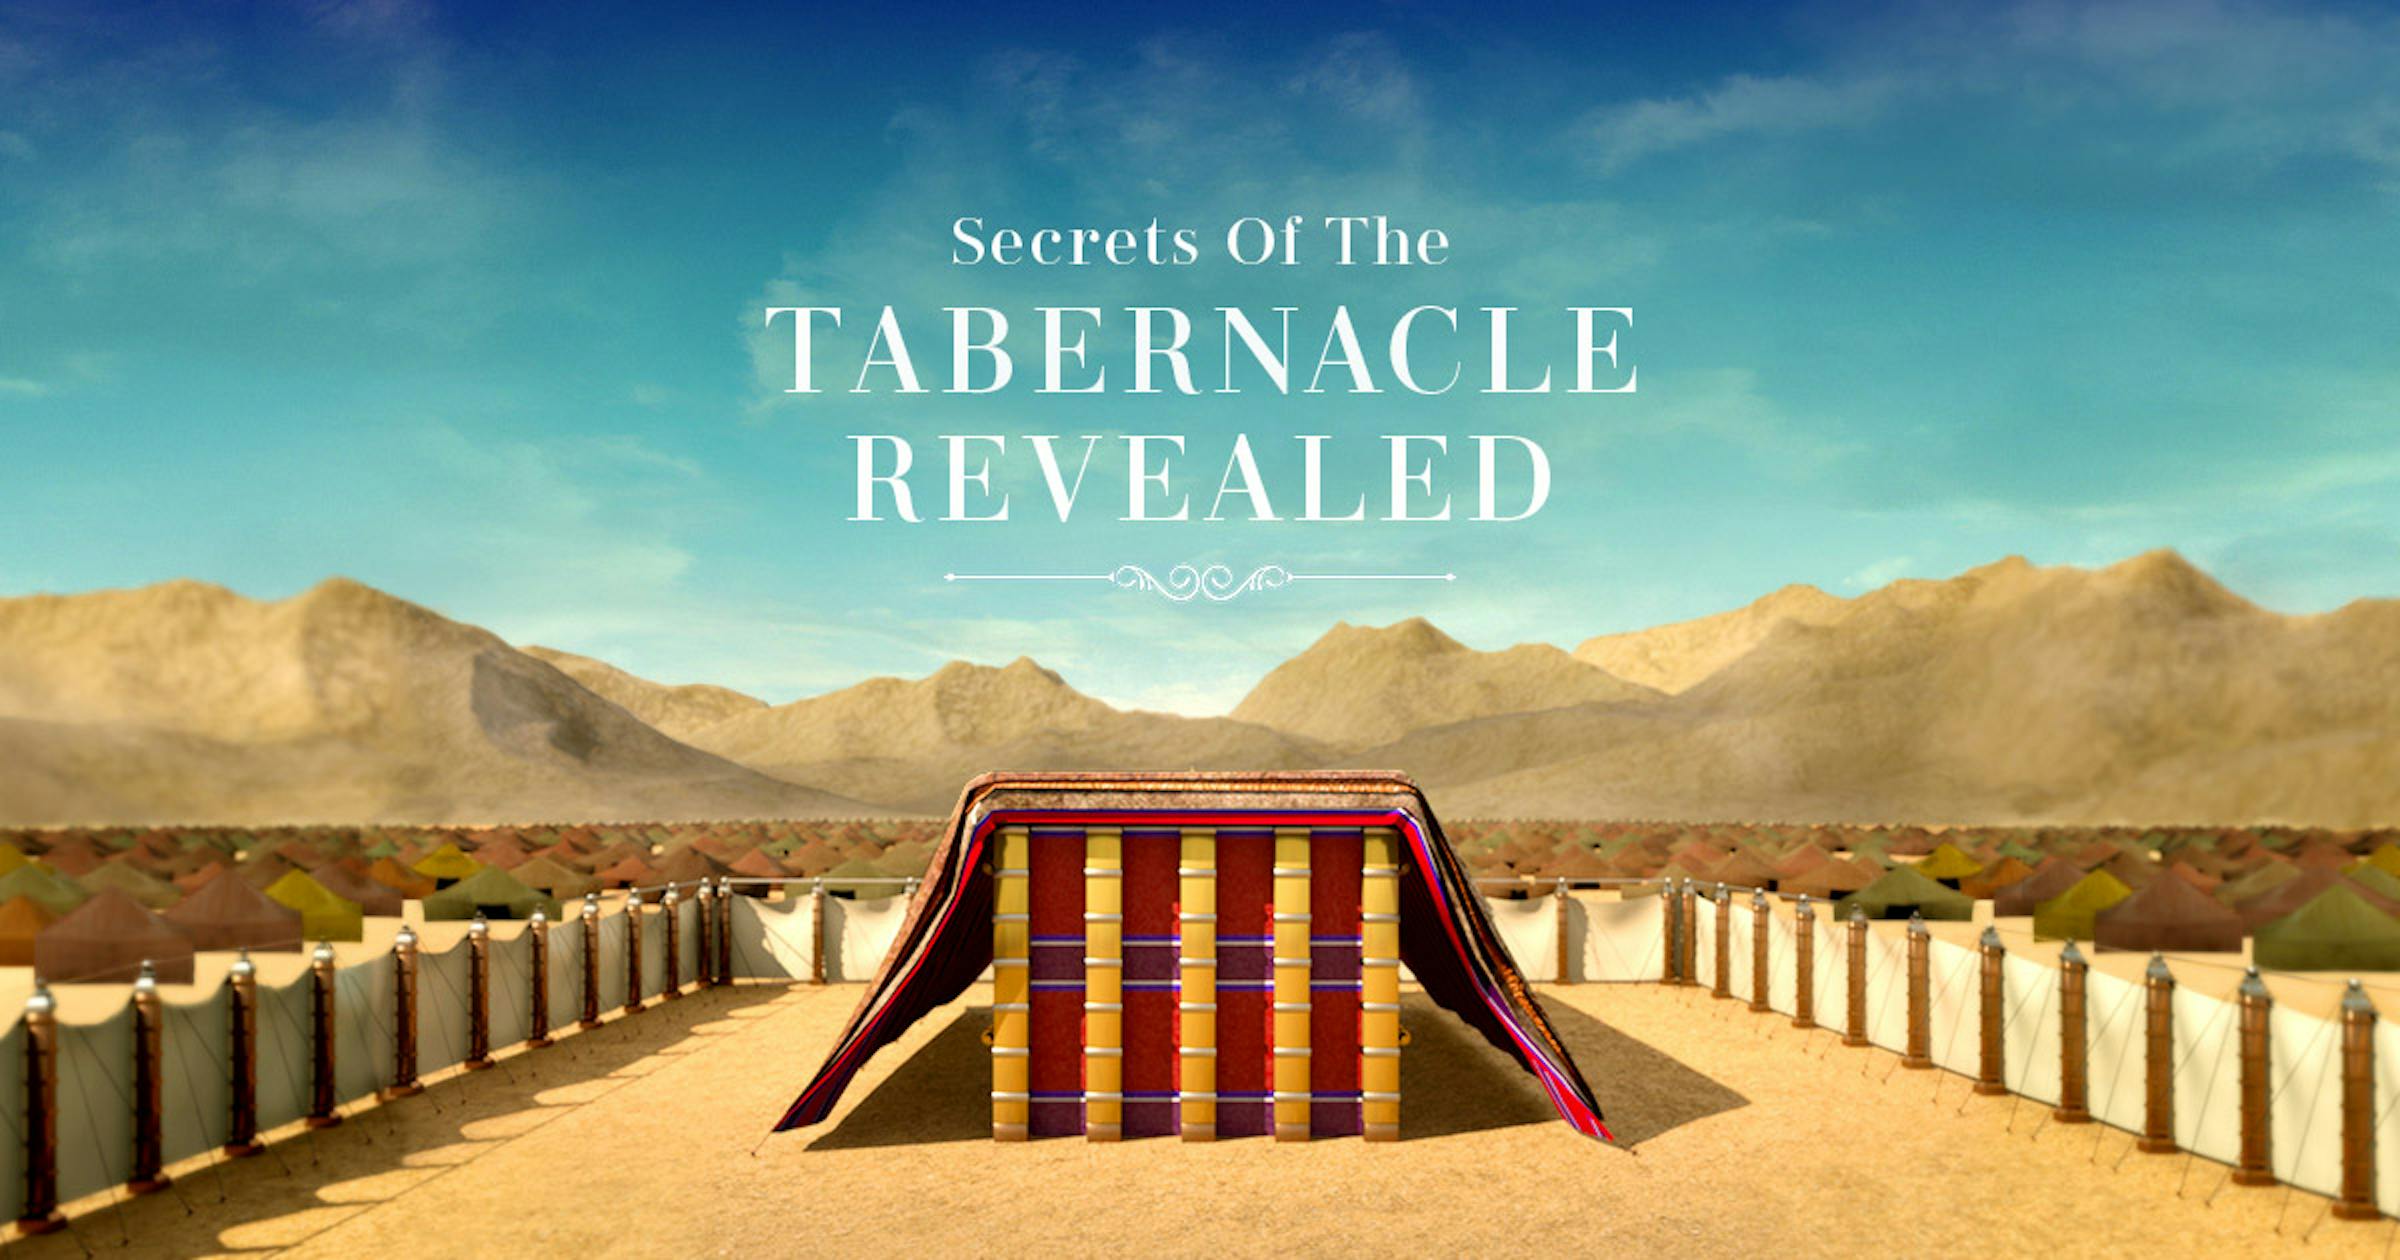 Wallpaper Secrets Of The Tabernacle Revealed